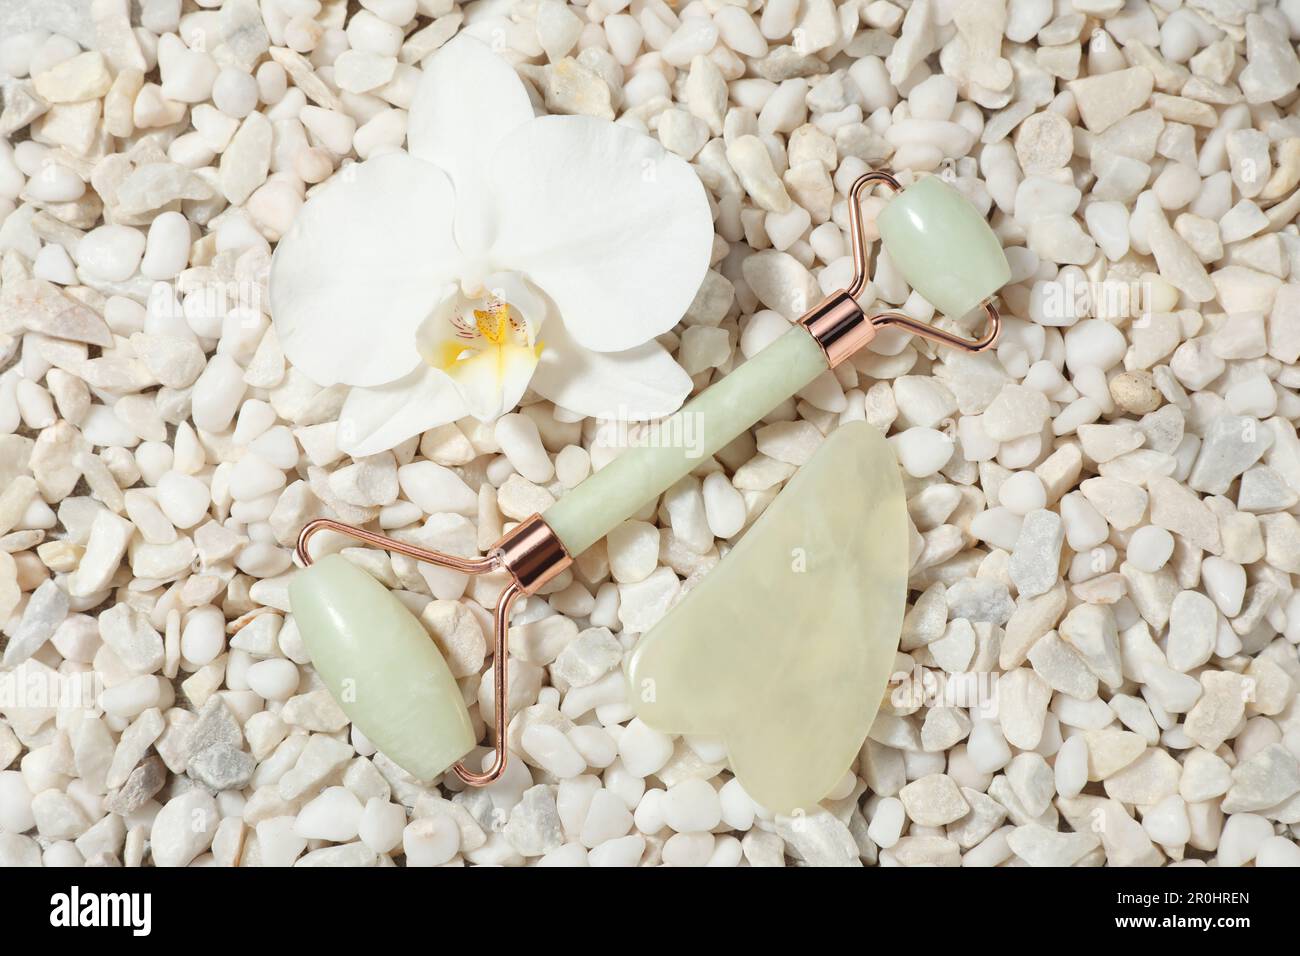 Quartz gua sha tool, face roller and orchid flower on white stones, flat lay Stock Photo